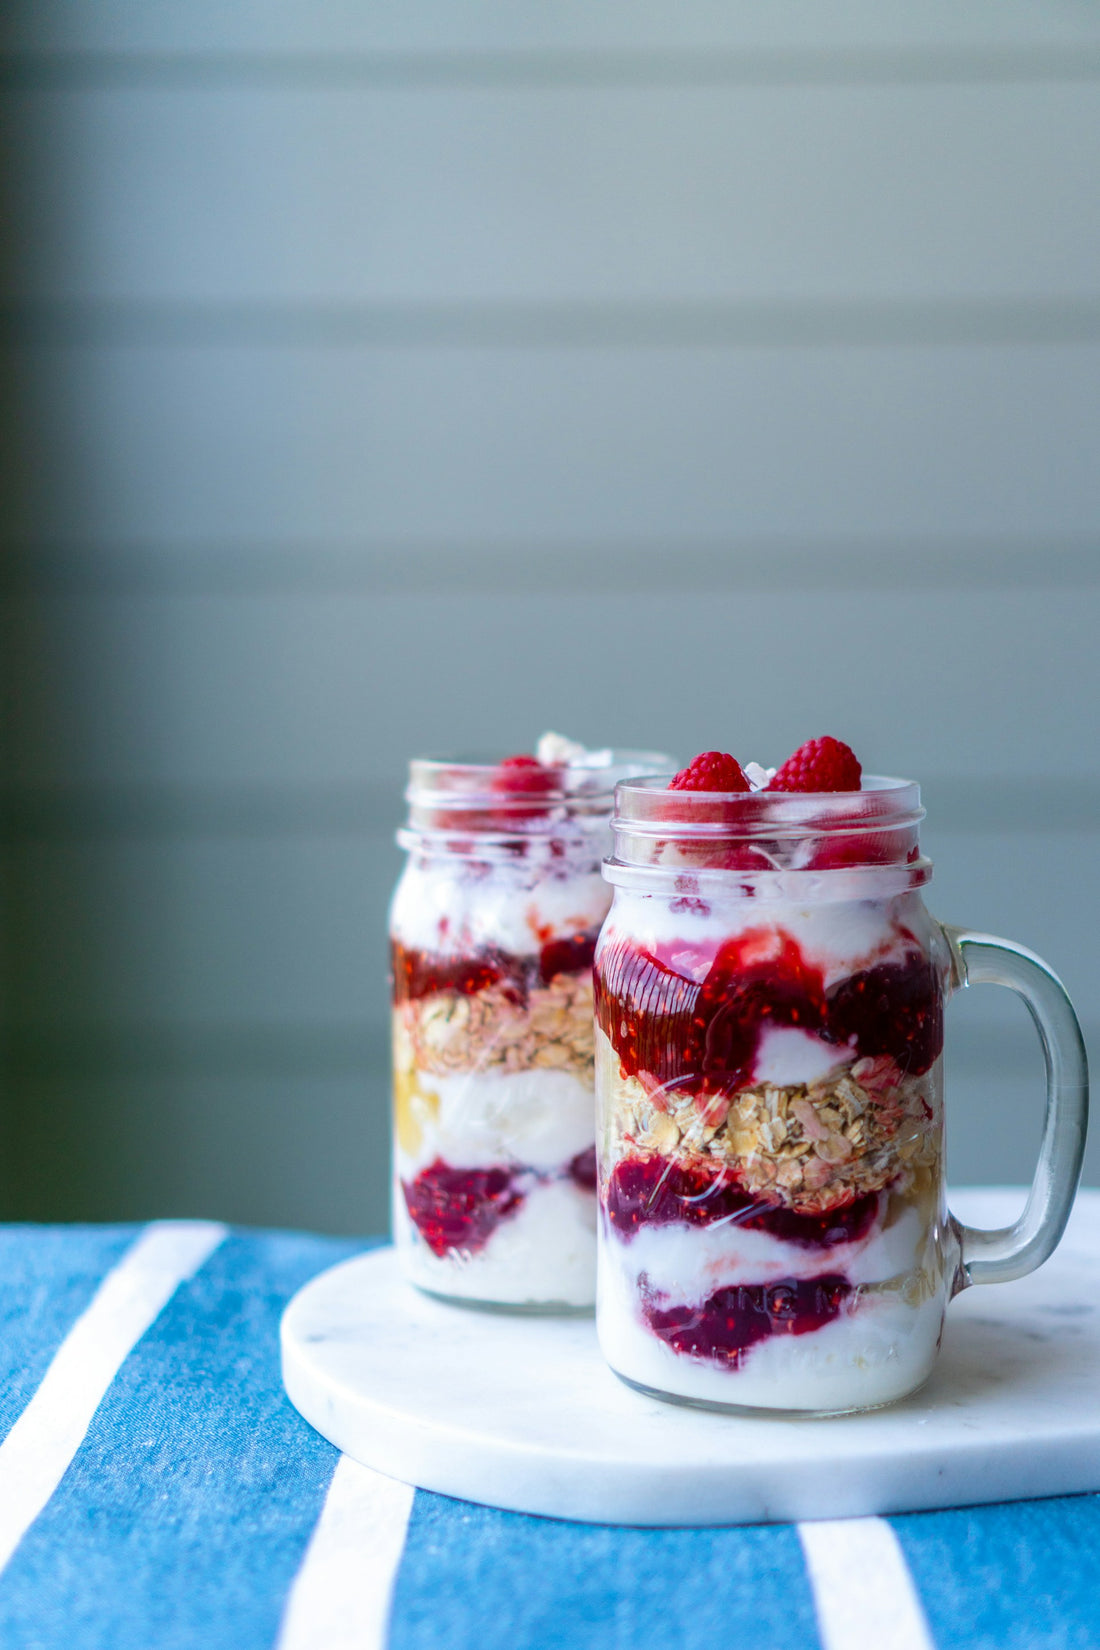 Are Overnight Oats Good for Diabetics